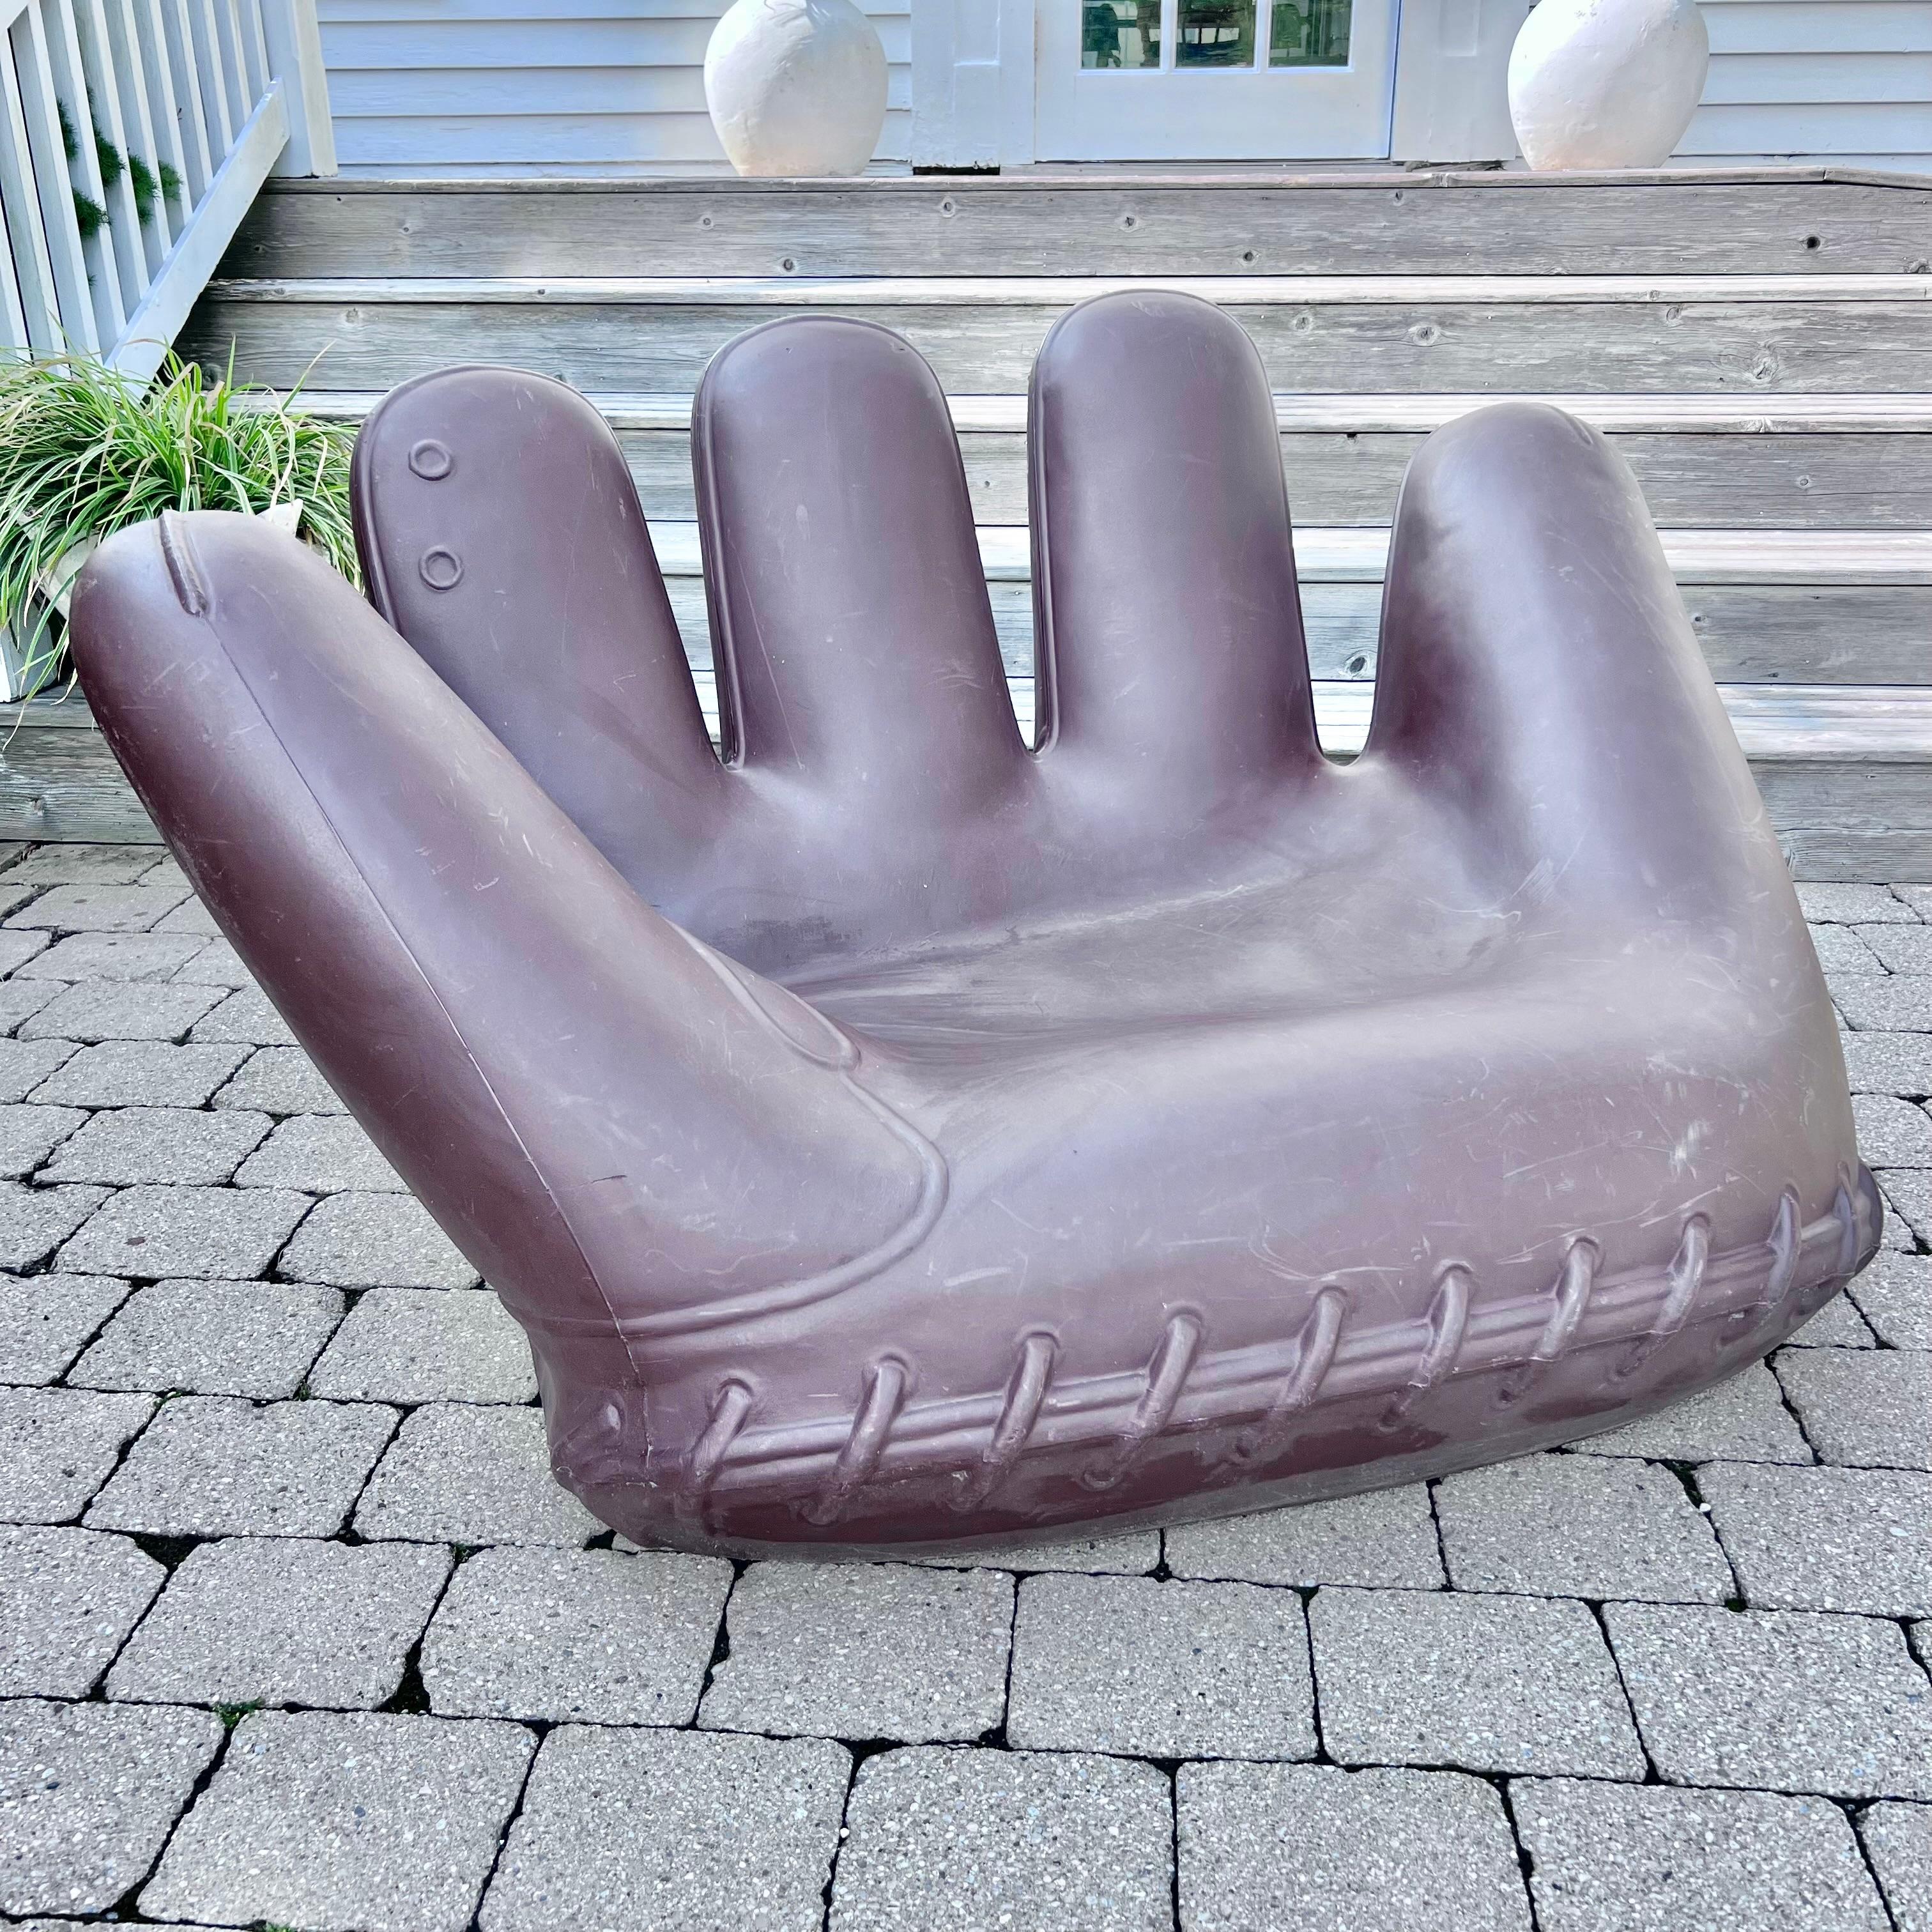 Monumental 'JOE' glove chair made for Heller. Originally designed by Jonathan De Pas, Donato D'Urbino and Paolo Lomazzi in the 1970's and made here in a thick plastic for outdoor use for Heller in 2003. Very light patina with scuffs and wear as